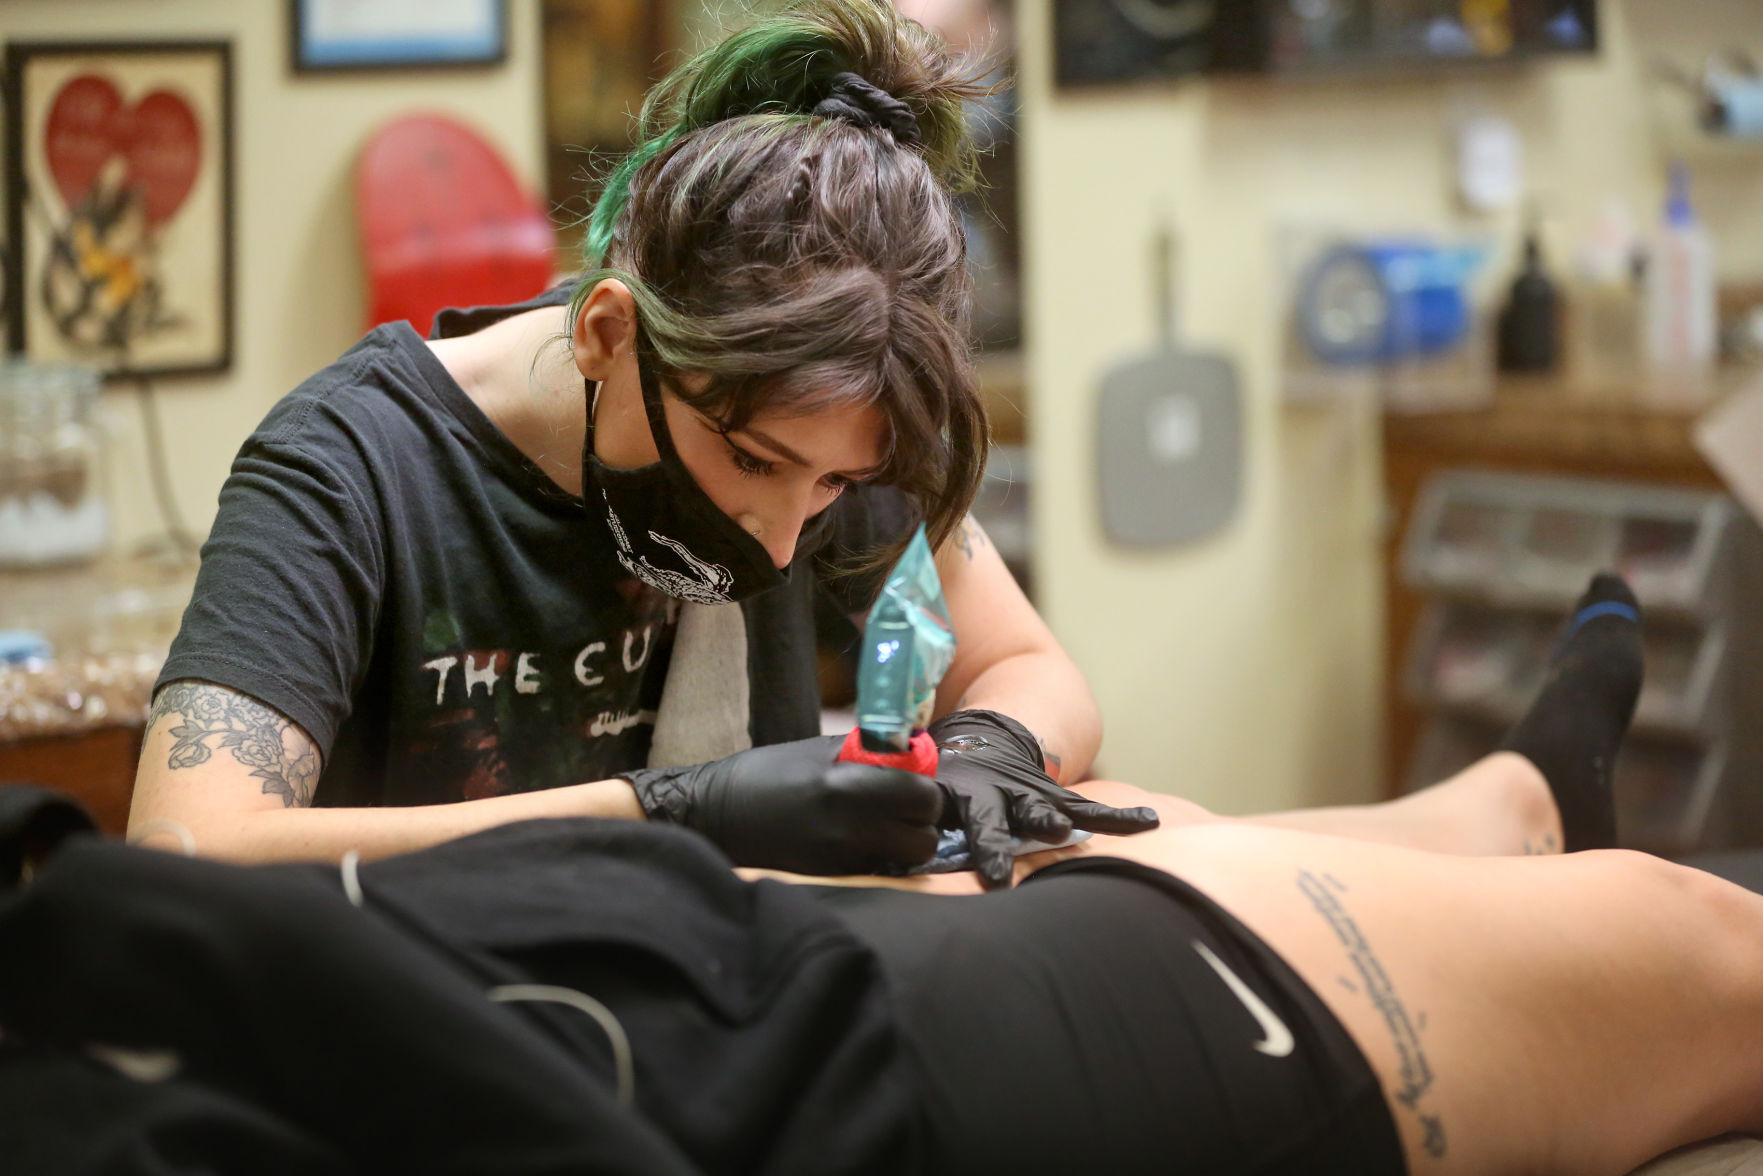 Morgan Hazer works on a tattoo for Paige Hilby, of Dubuque, at Ink Tattoo Studio in Dubuque on Saturday. PHOTO CREDIT: JESSICA REILLY